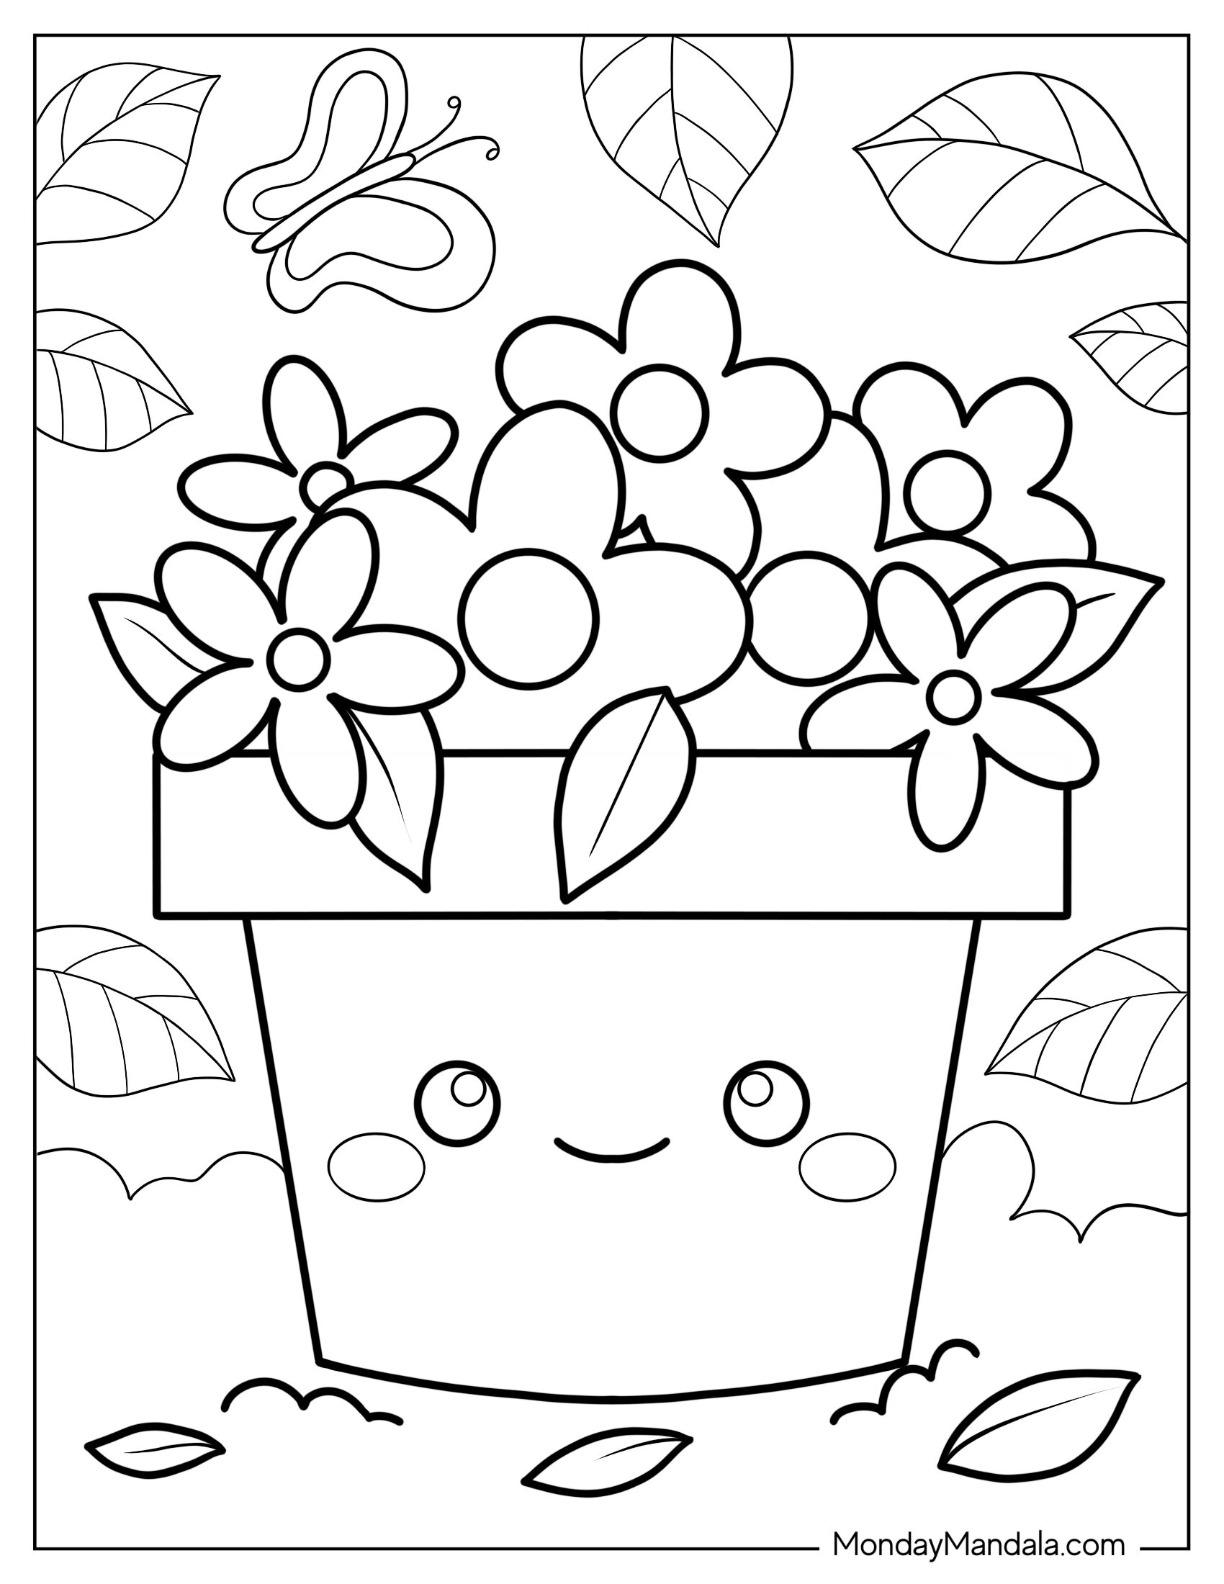 Flower coloring pages free pdf printables